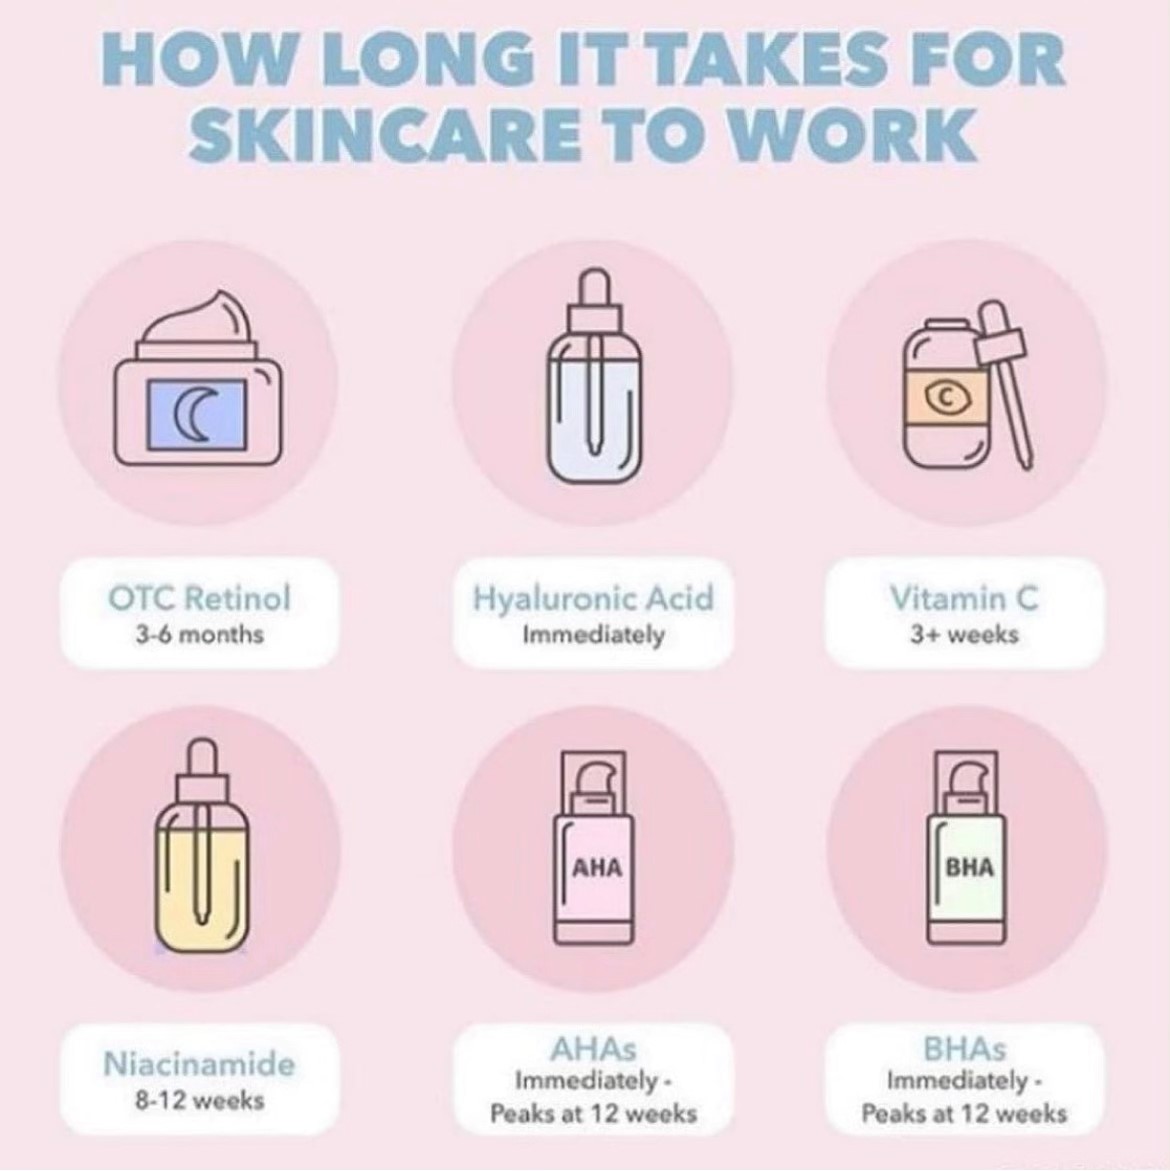 How long it takes for skincare to work